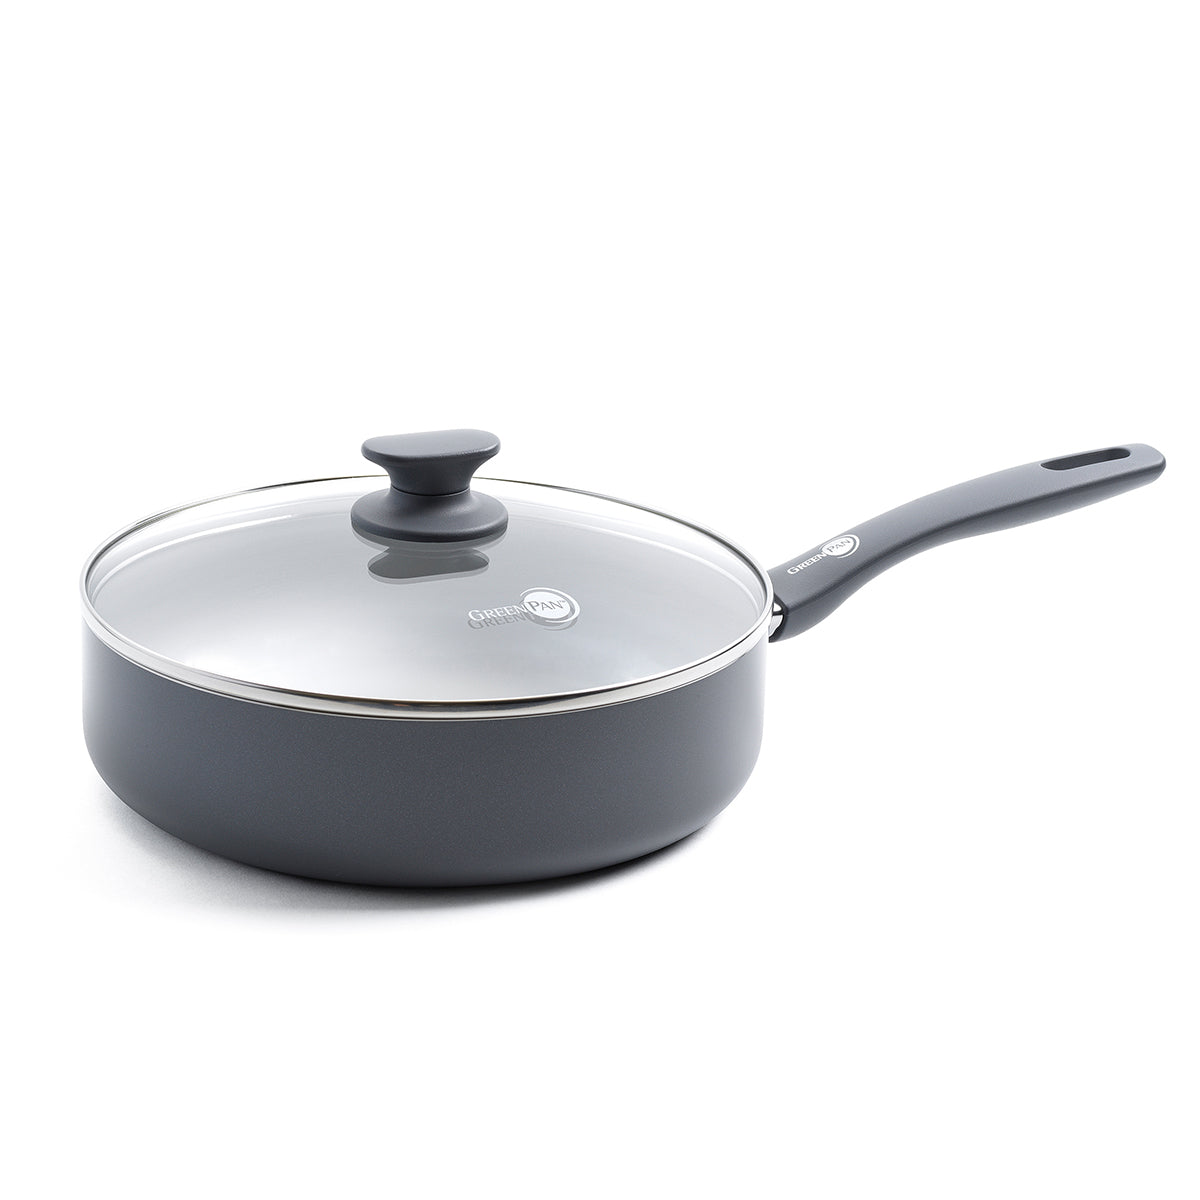 BK Black Steel Frypan Review: Affordable and Lightweight